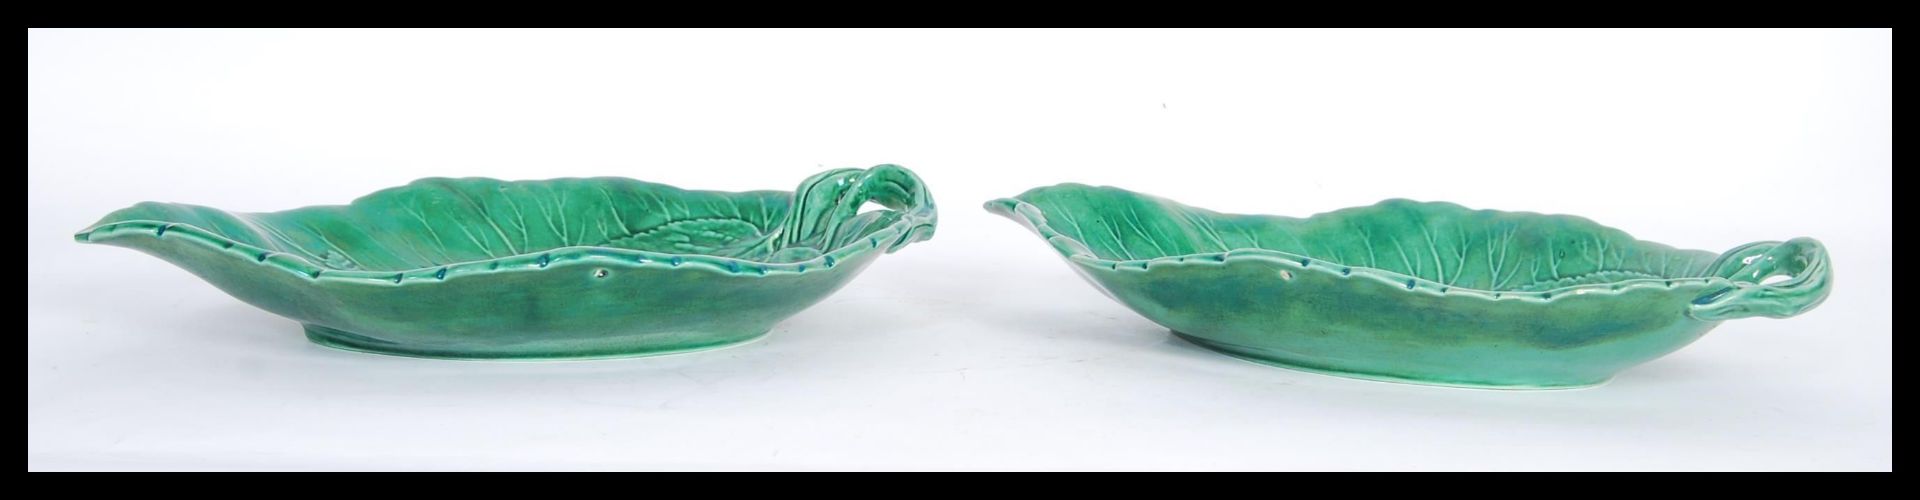 A pair of 19th Century Minton Majolica serving plates in the form of two leaves having raised - Bild 2 aus 3